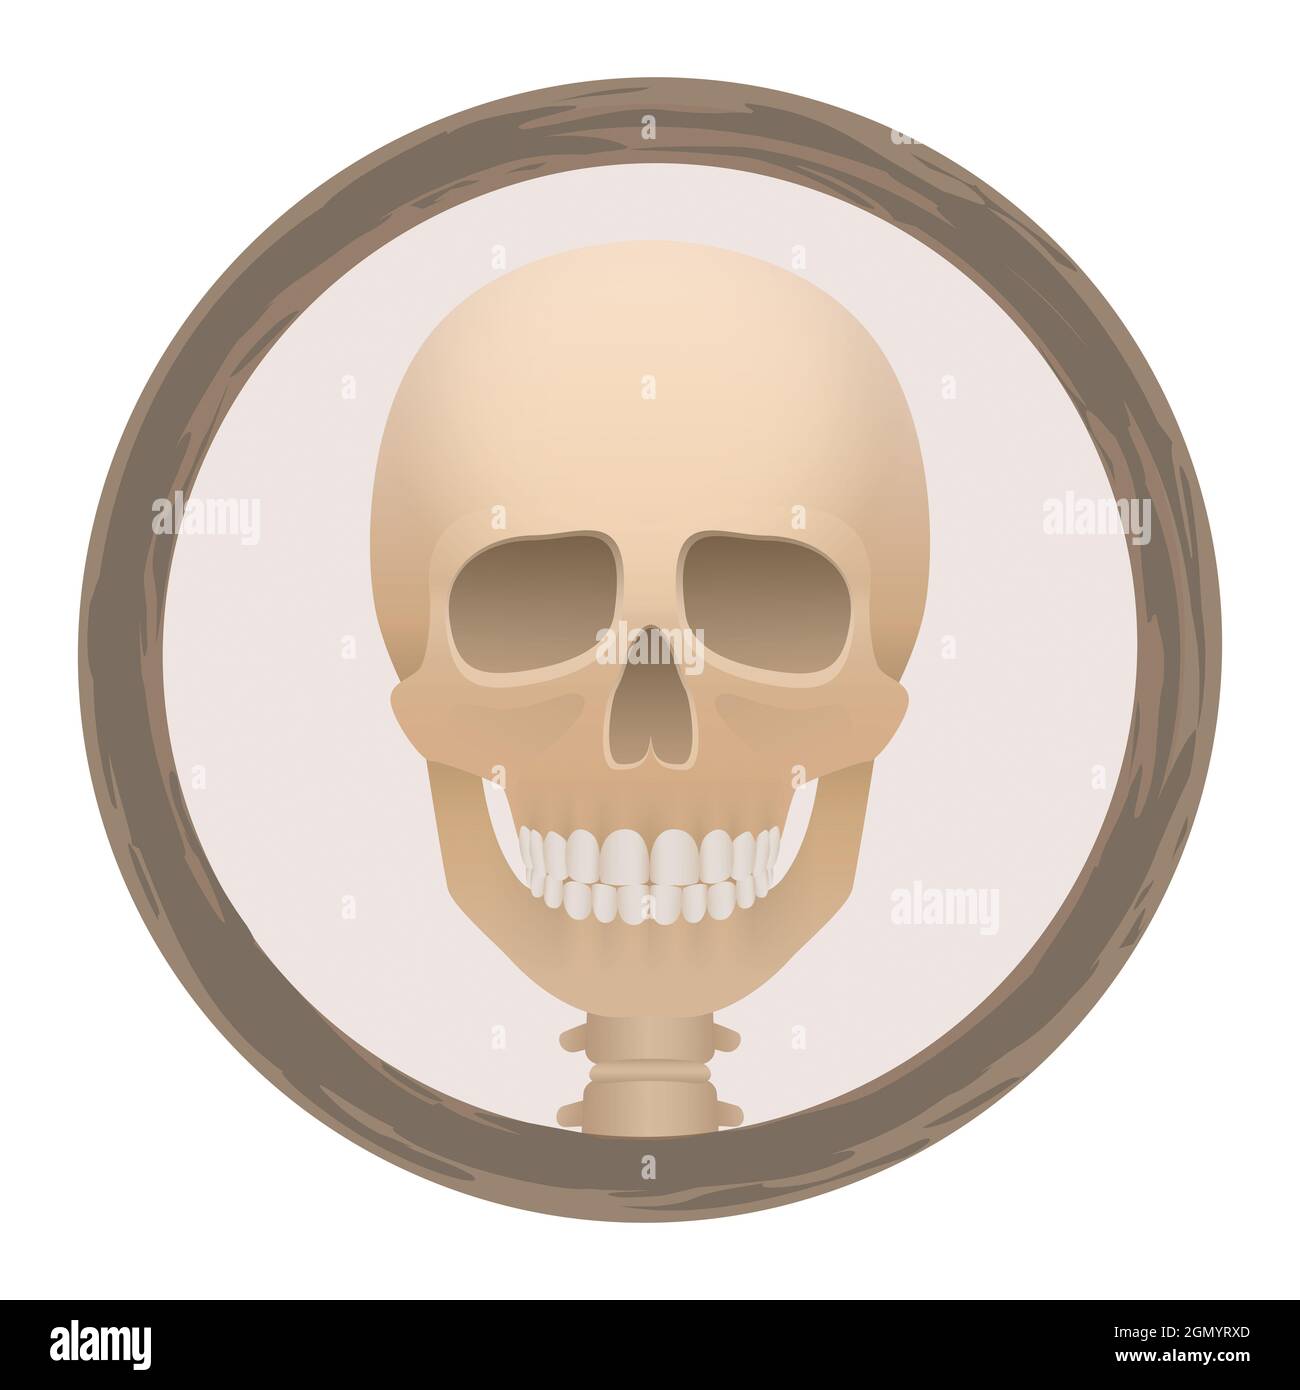 Skull or Deaths head logo in a round frame - creepy, spooky, frightening, but with a friendly smile - illustration on white background. Stock Photo